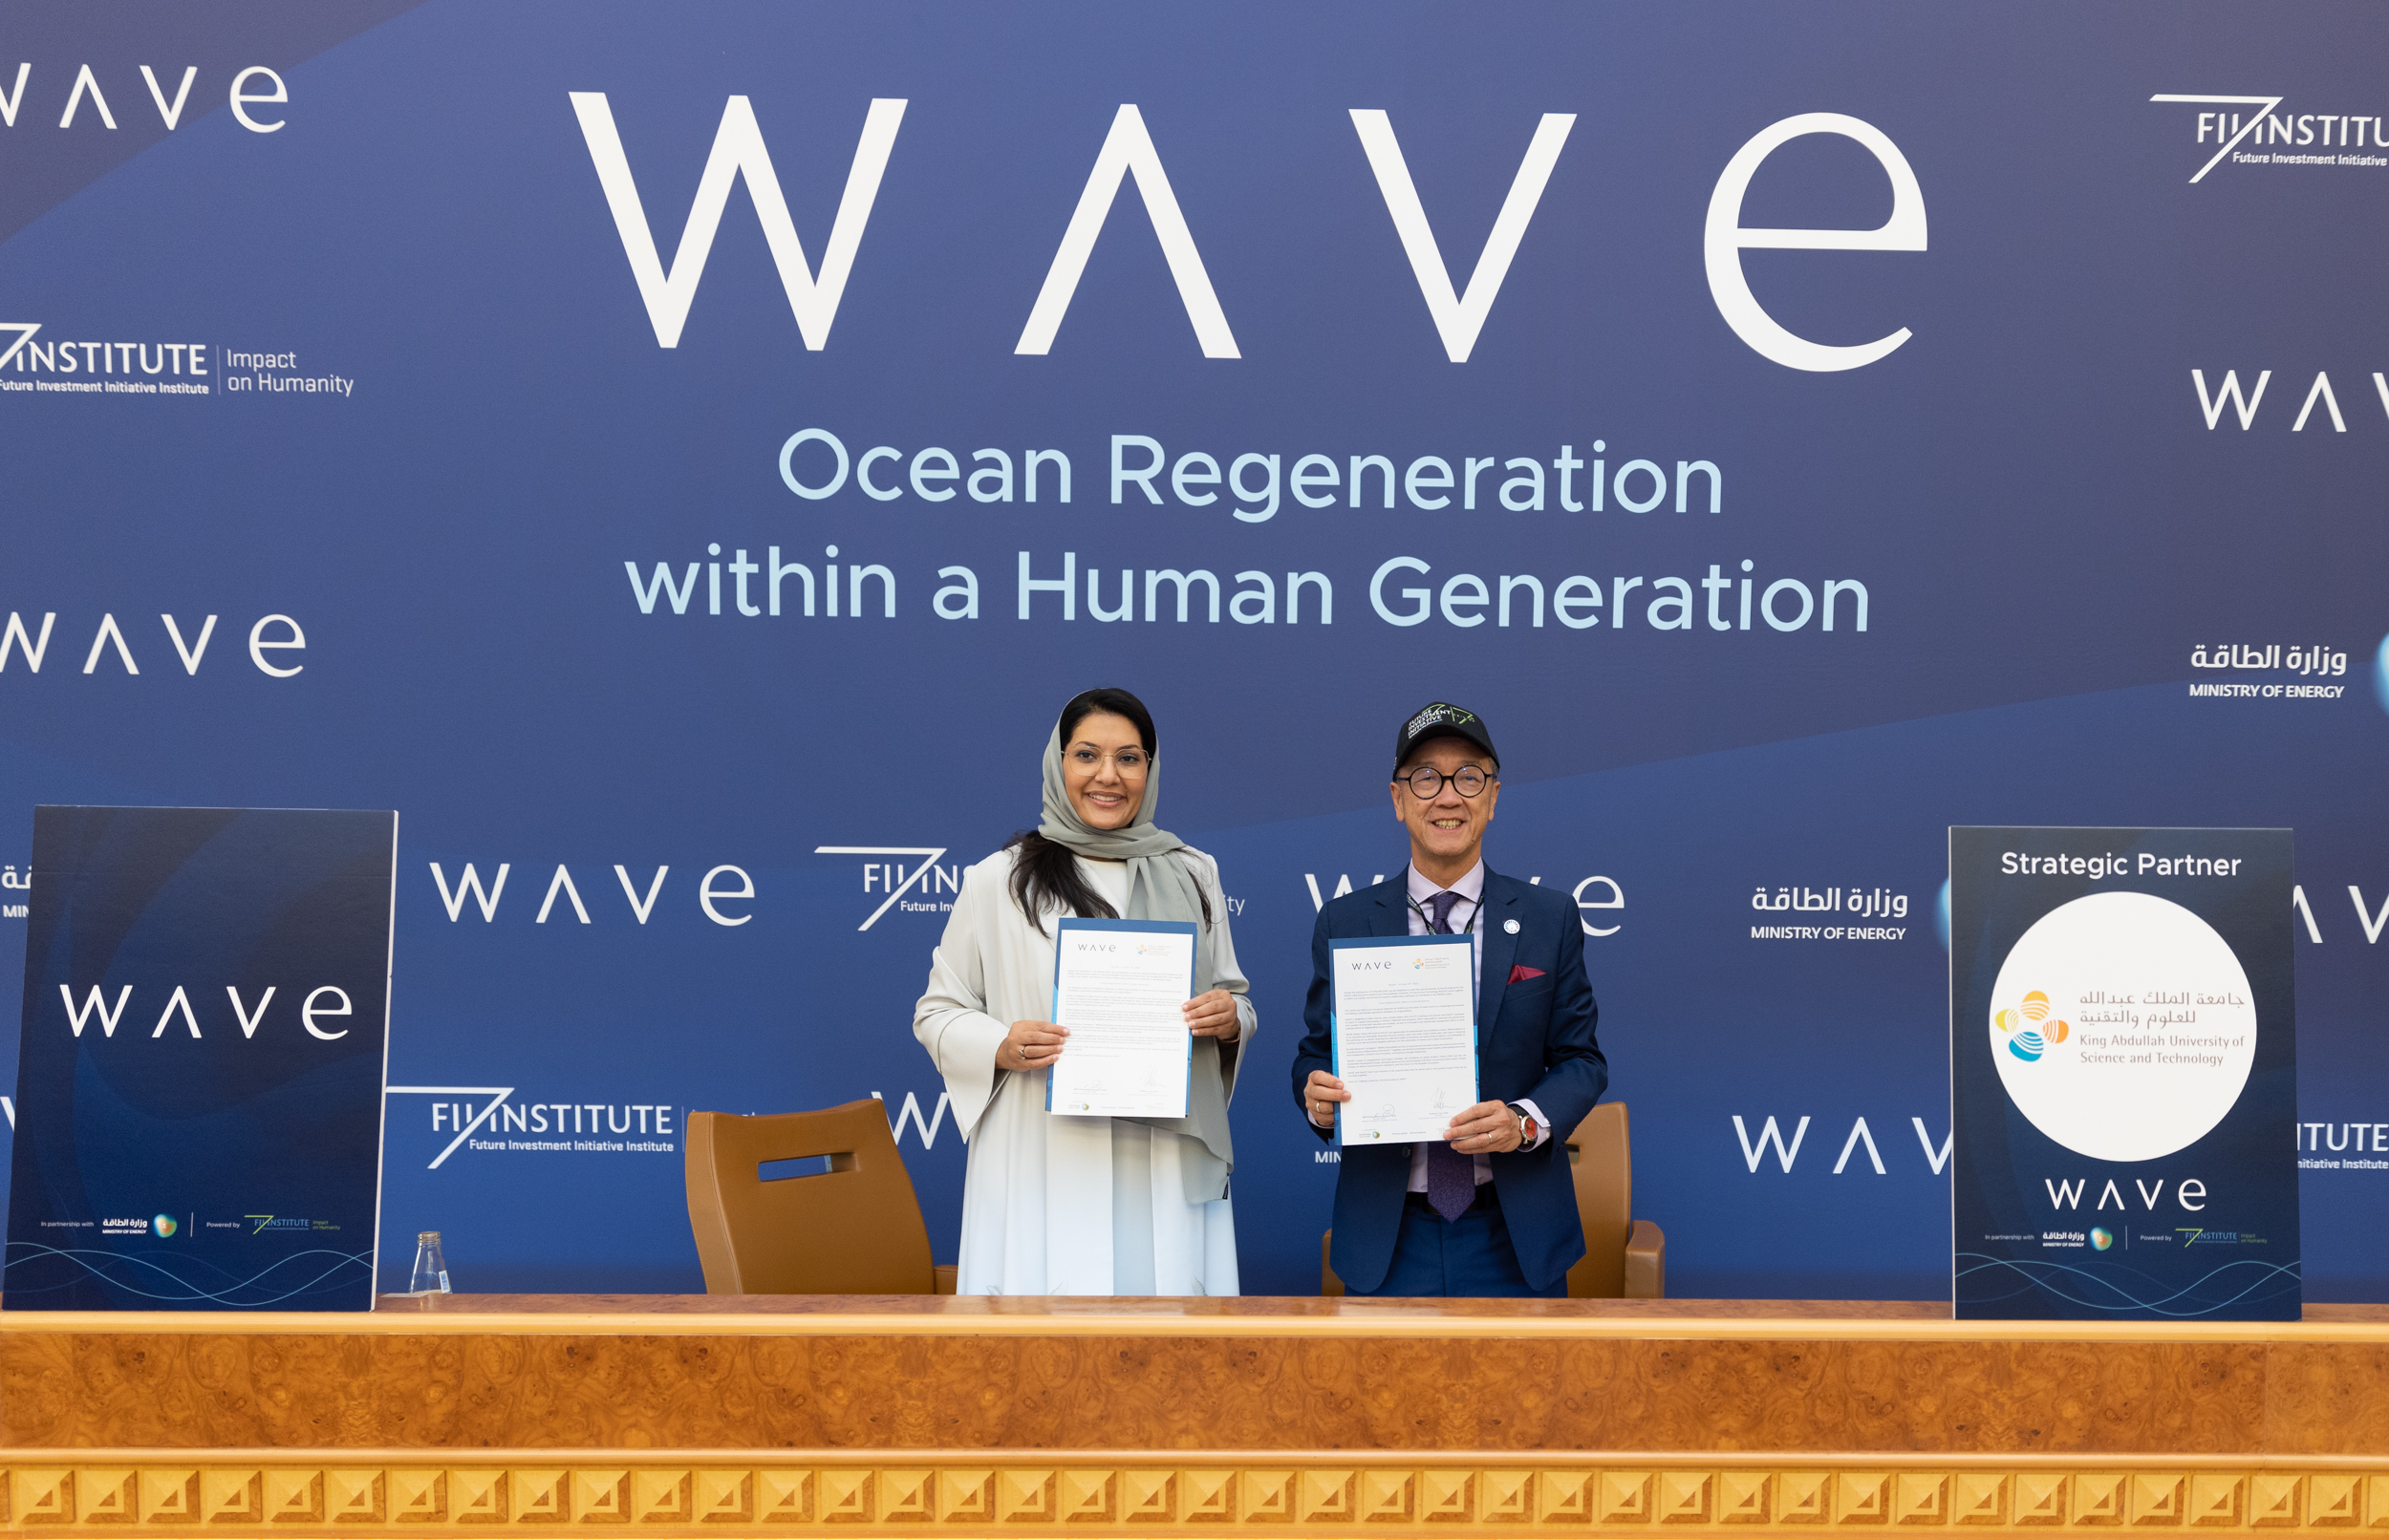 In the Presence of HRH Minister of Energy, FII Launches WAVE Initiative, led by Princess Reema Al-Saud, to Accelerate Ocean Regeneration Efforts